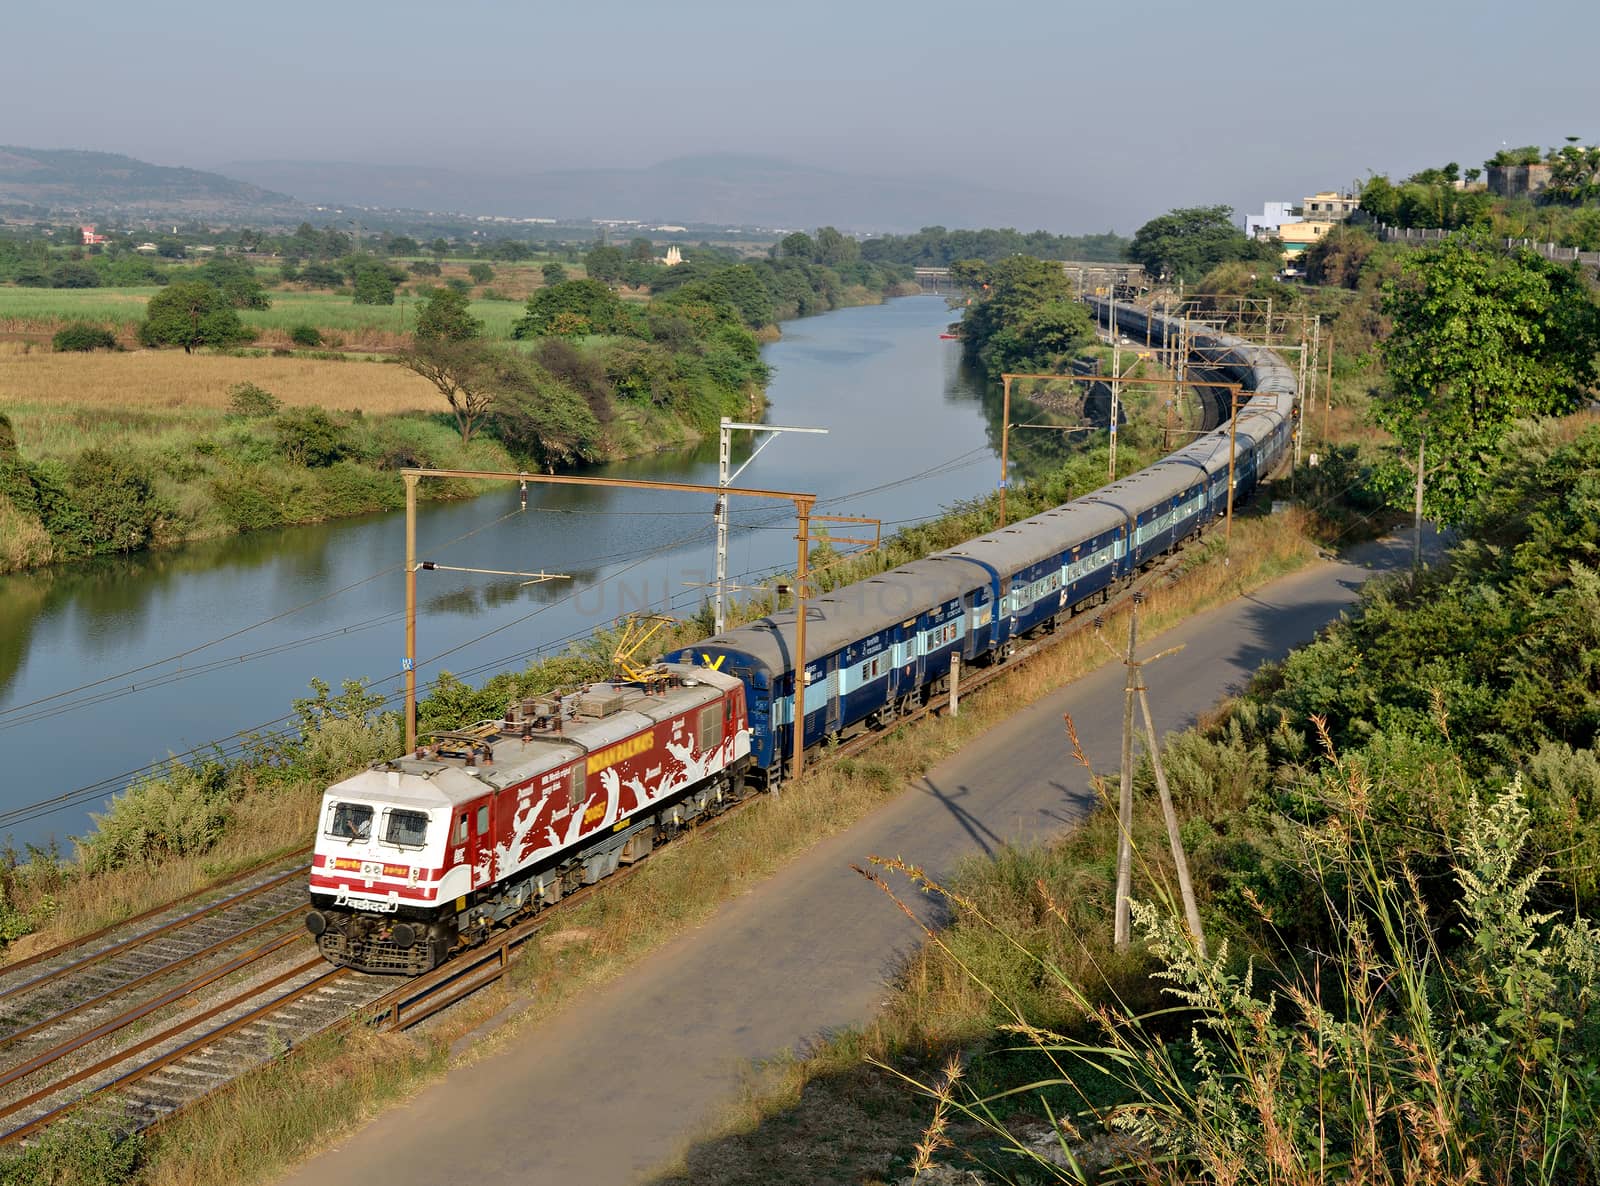 Amul Milk advertised locomotive with Indore express running parallel to a river in through Kamshet, pune, India. by lalam